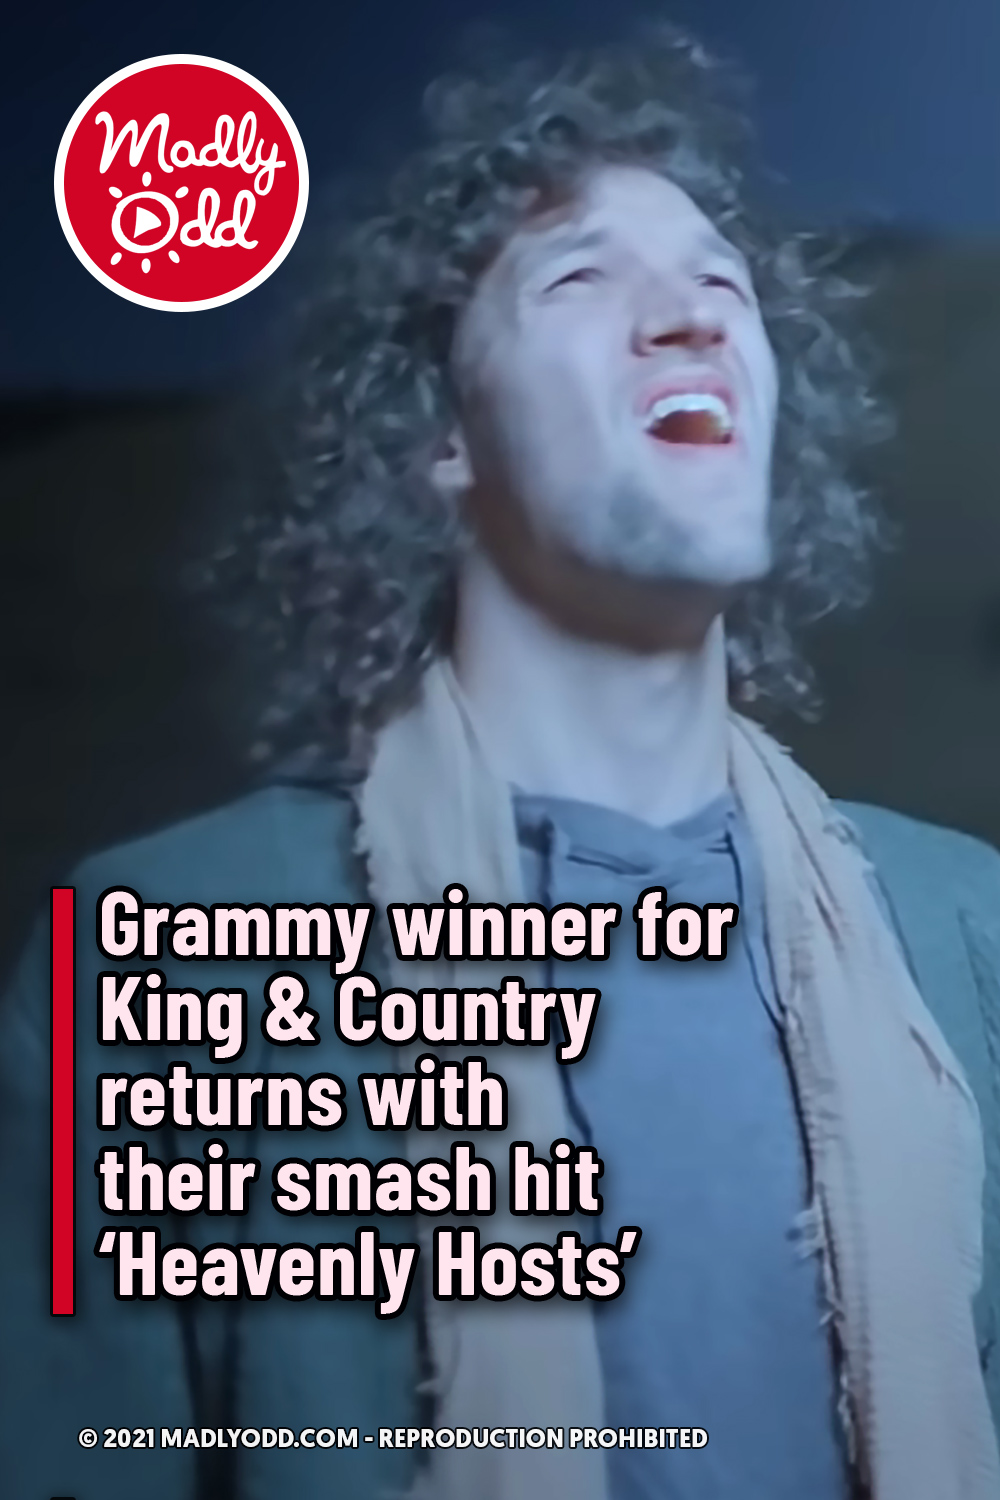 Grammy winner for King & Country returns with their smash hit ‘Heavenly Hosts’